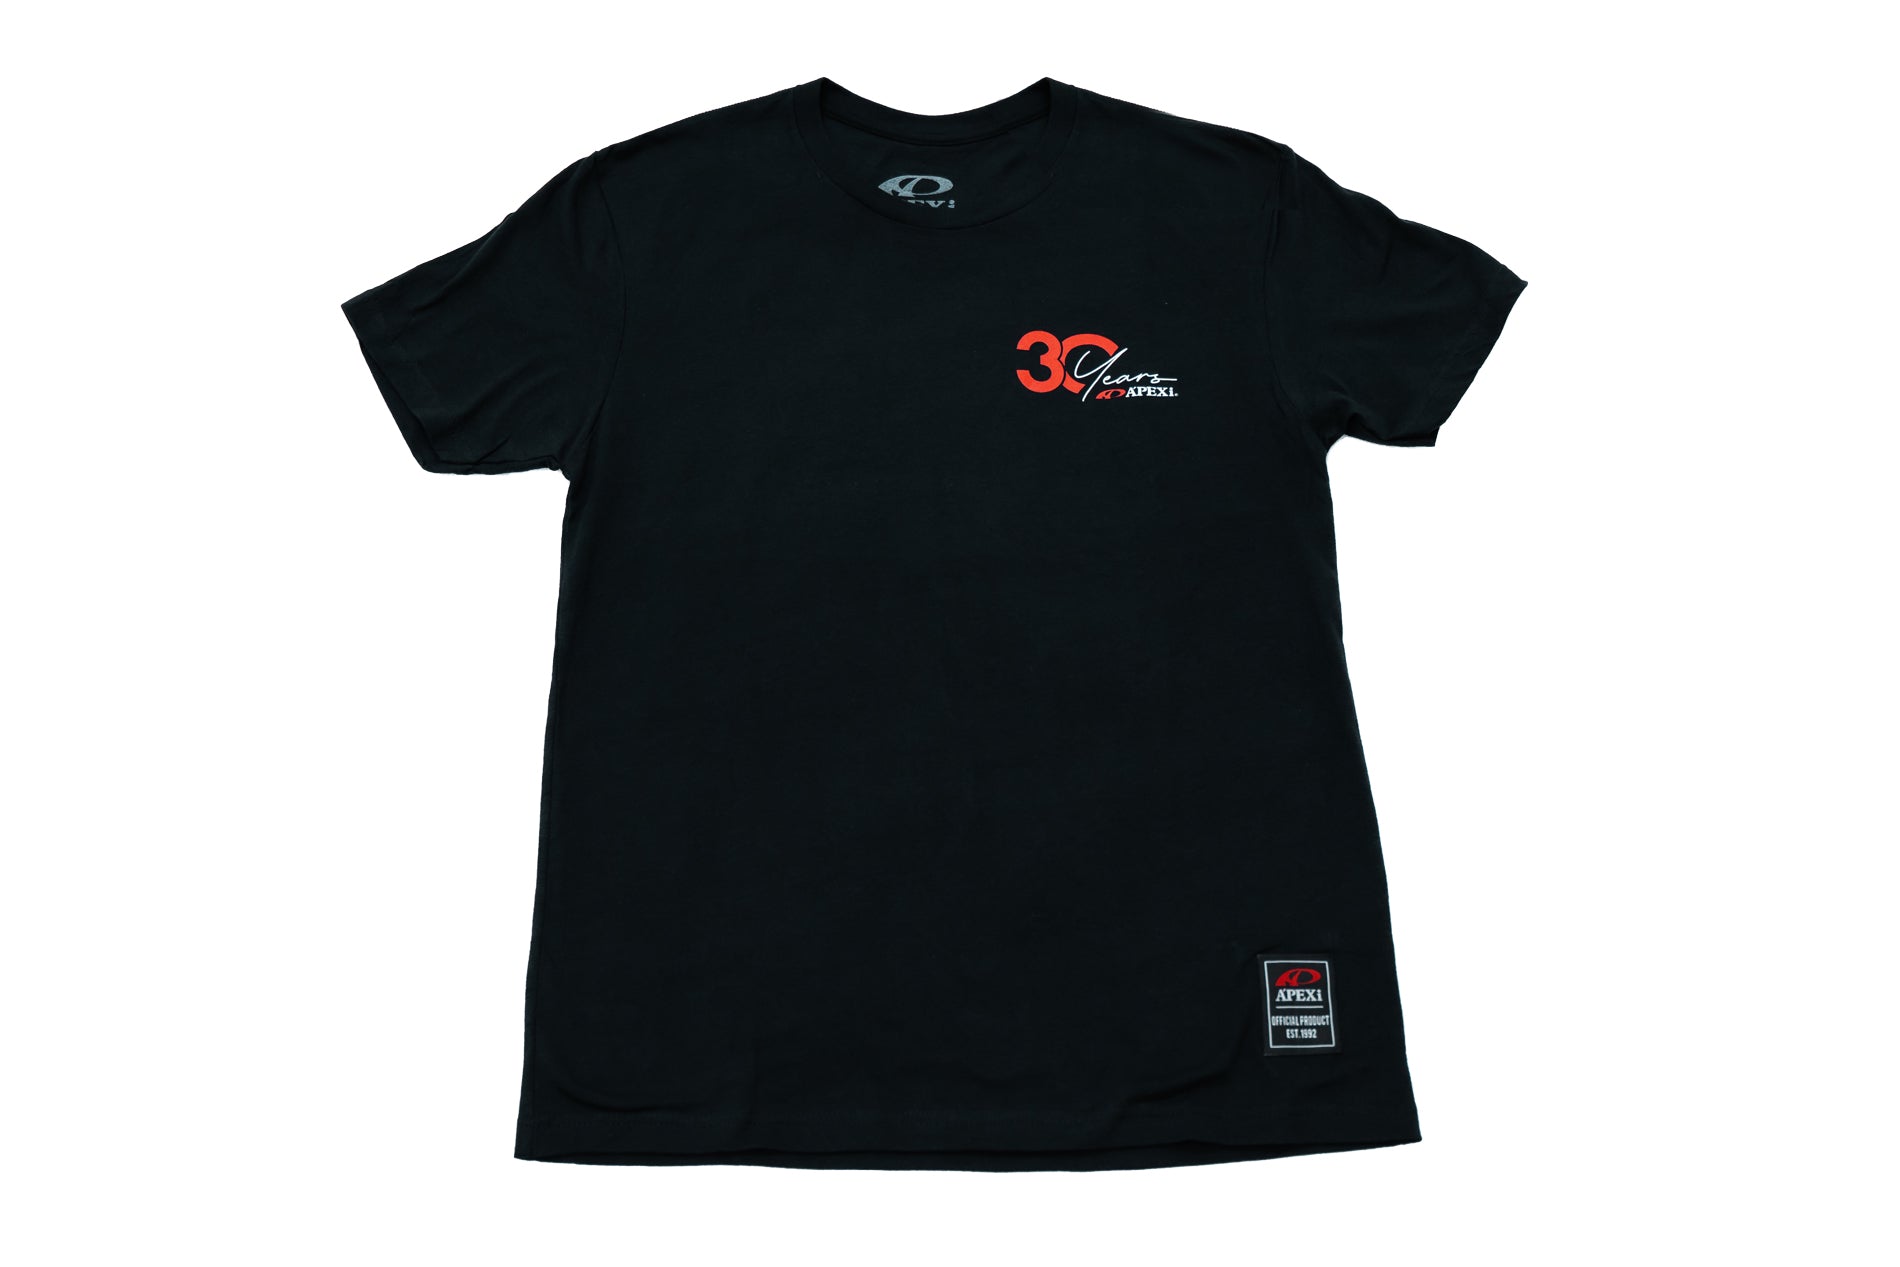 A'PEXi - A'PEXi 30th Anniversary Tee ** LIMITED EDITION **-3